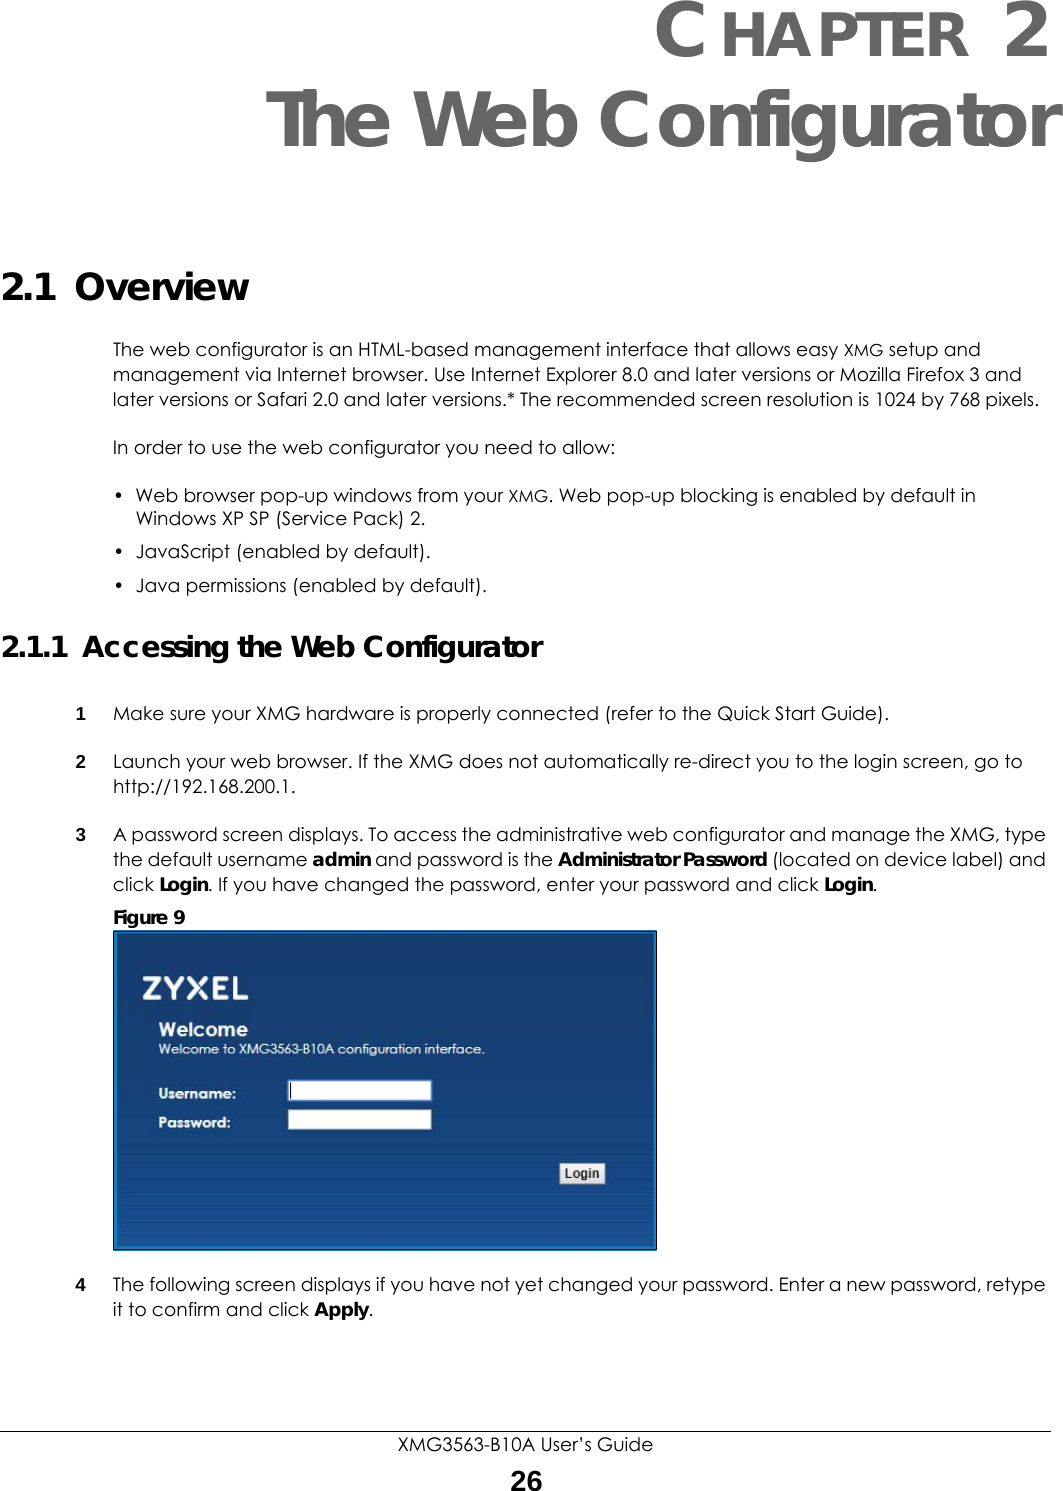 XMG3563-B10A User’s Guide26CHAPTER 2The Web Configurator2.1  OverviewThe web configurator is an HTML-based management interface that allows easy XMG setup and management via Internet browser. Use Internet Explorer 8.0 and later versions or Mozilla Firefox 3 and later versions or Safari 2.0 and later versions.* The recommended screen resolution is 1024 by 768 pixels.In order to use the web configurator you need to allow:• Web browser pop-up windows from your XMG. Web pop-up blocking is enabled by default in Windows XP SP (Service Pack) 2.• JavaScript (enabled by default).• Java permissions (enabled by default).2.1.1  Accessing the Web Configurator1Make sure your XMG hardware is properly connected (refer to the Quick Start Guide).2Launch your web browser. If the XMG does not automatically re-direct you to the login screen, go to http://192.168.200.1.3A password screen displays. To access the administrative web configurator and manage the XMG, type the default username admin and password is the Administrator Password (located on device label) and click Login. If you have changed the password, enter your password and click Login. Figure 9   4The following screen displays if you have not yet changed your password. Enter a new password, retype it to confirm and click Apply.